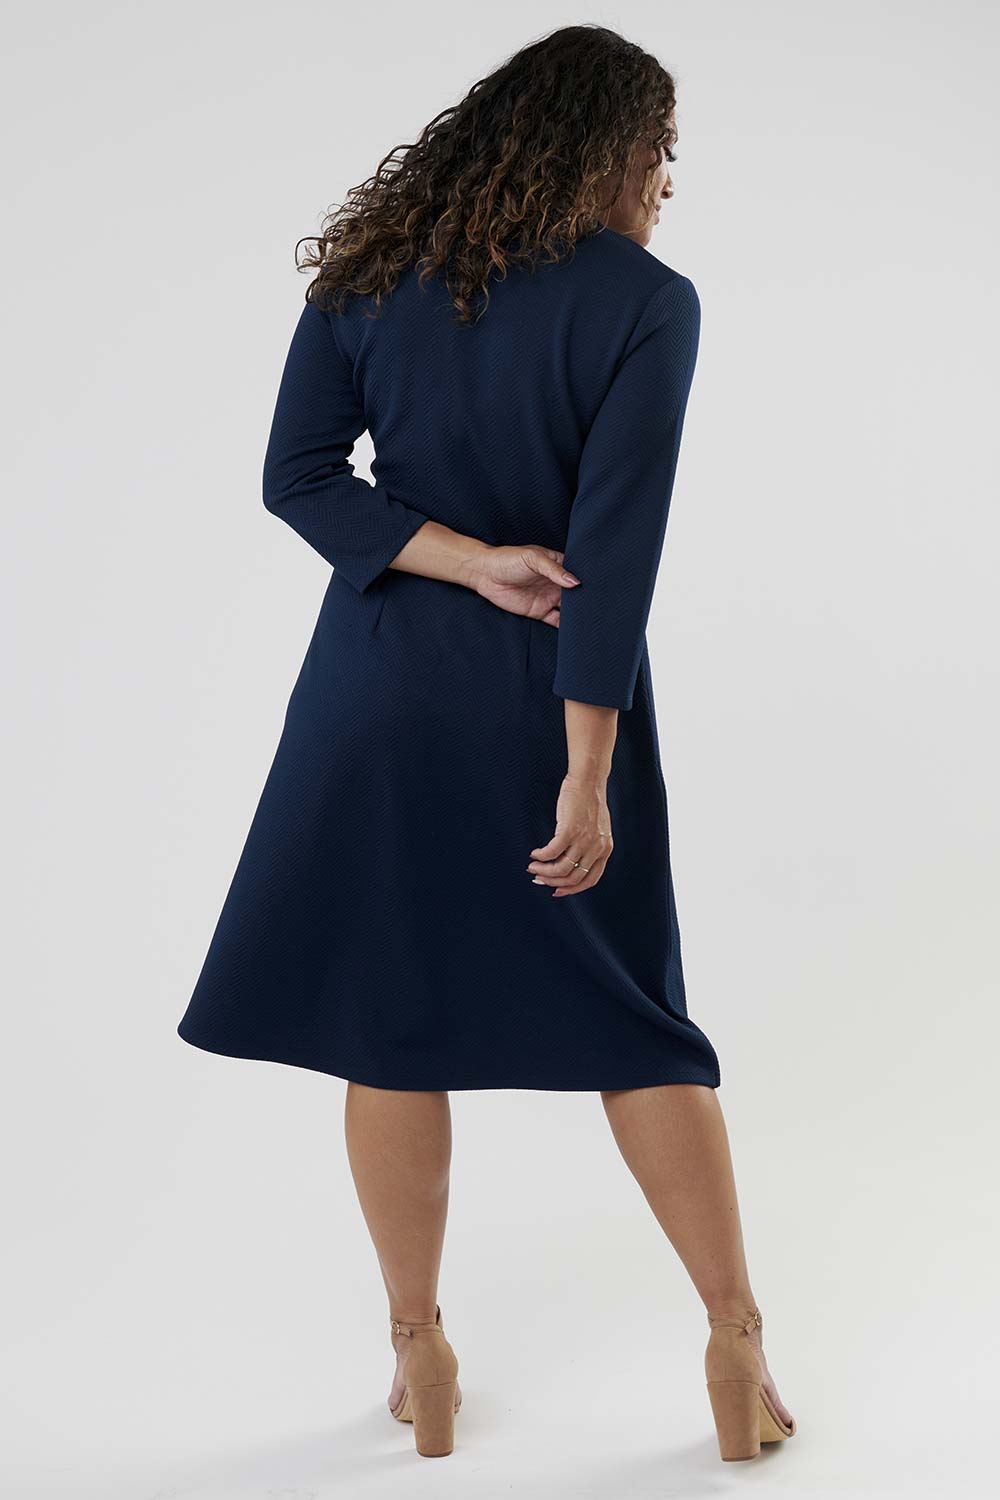 Between You and Me Wrap Midi Dress-Navy